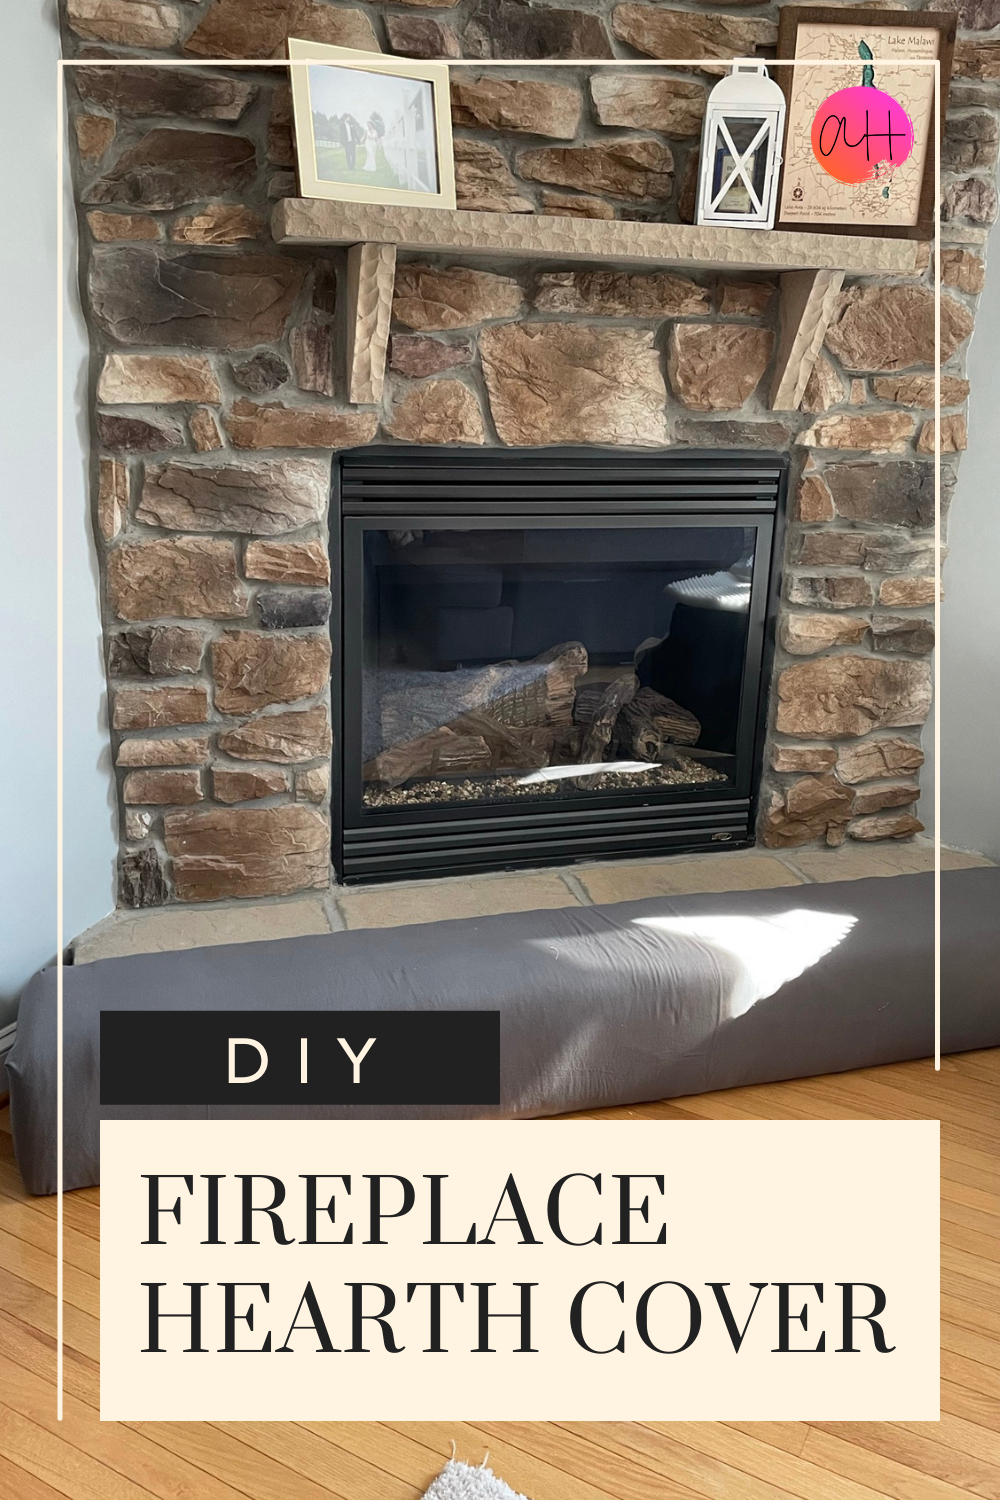 https://annemarieholt.com/wp-content/uploads/2021/09/Fireplace-cover-photo.png